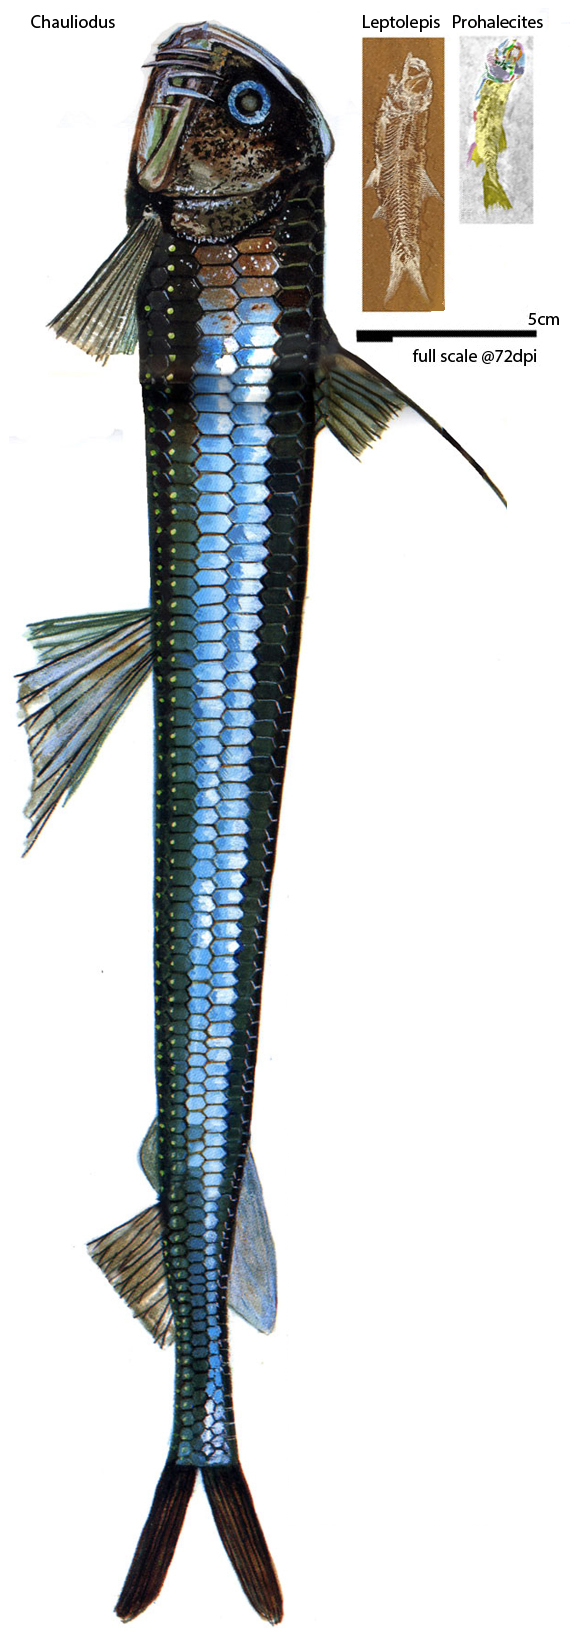 Viperfish Chauliodus to scale with Prohalecites and Leptolepis